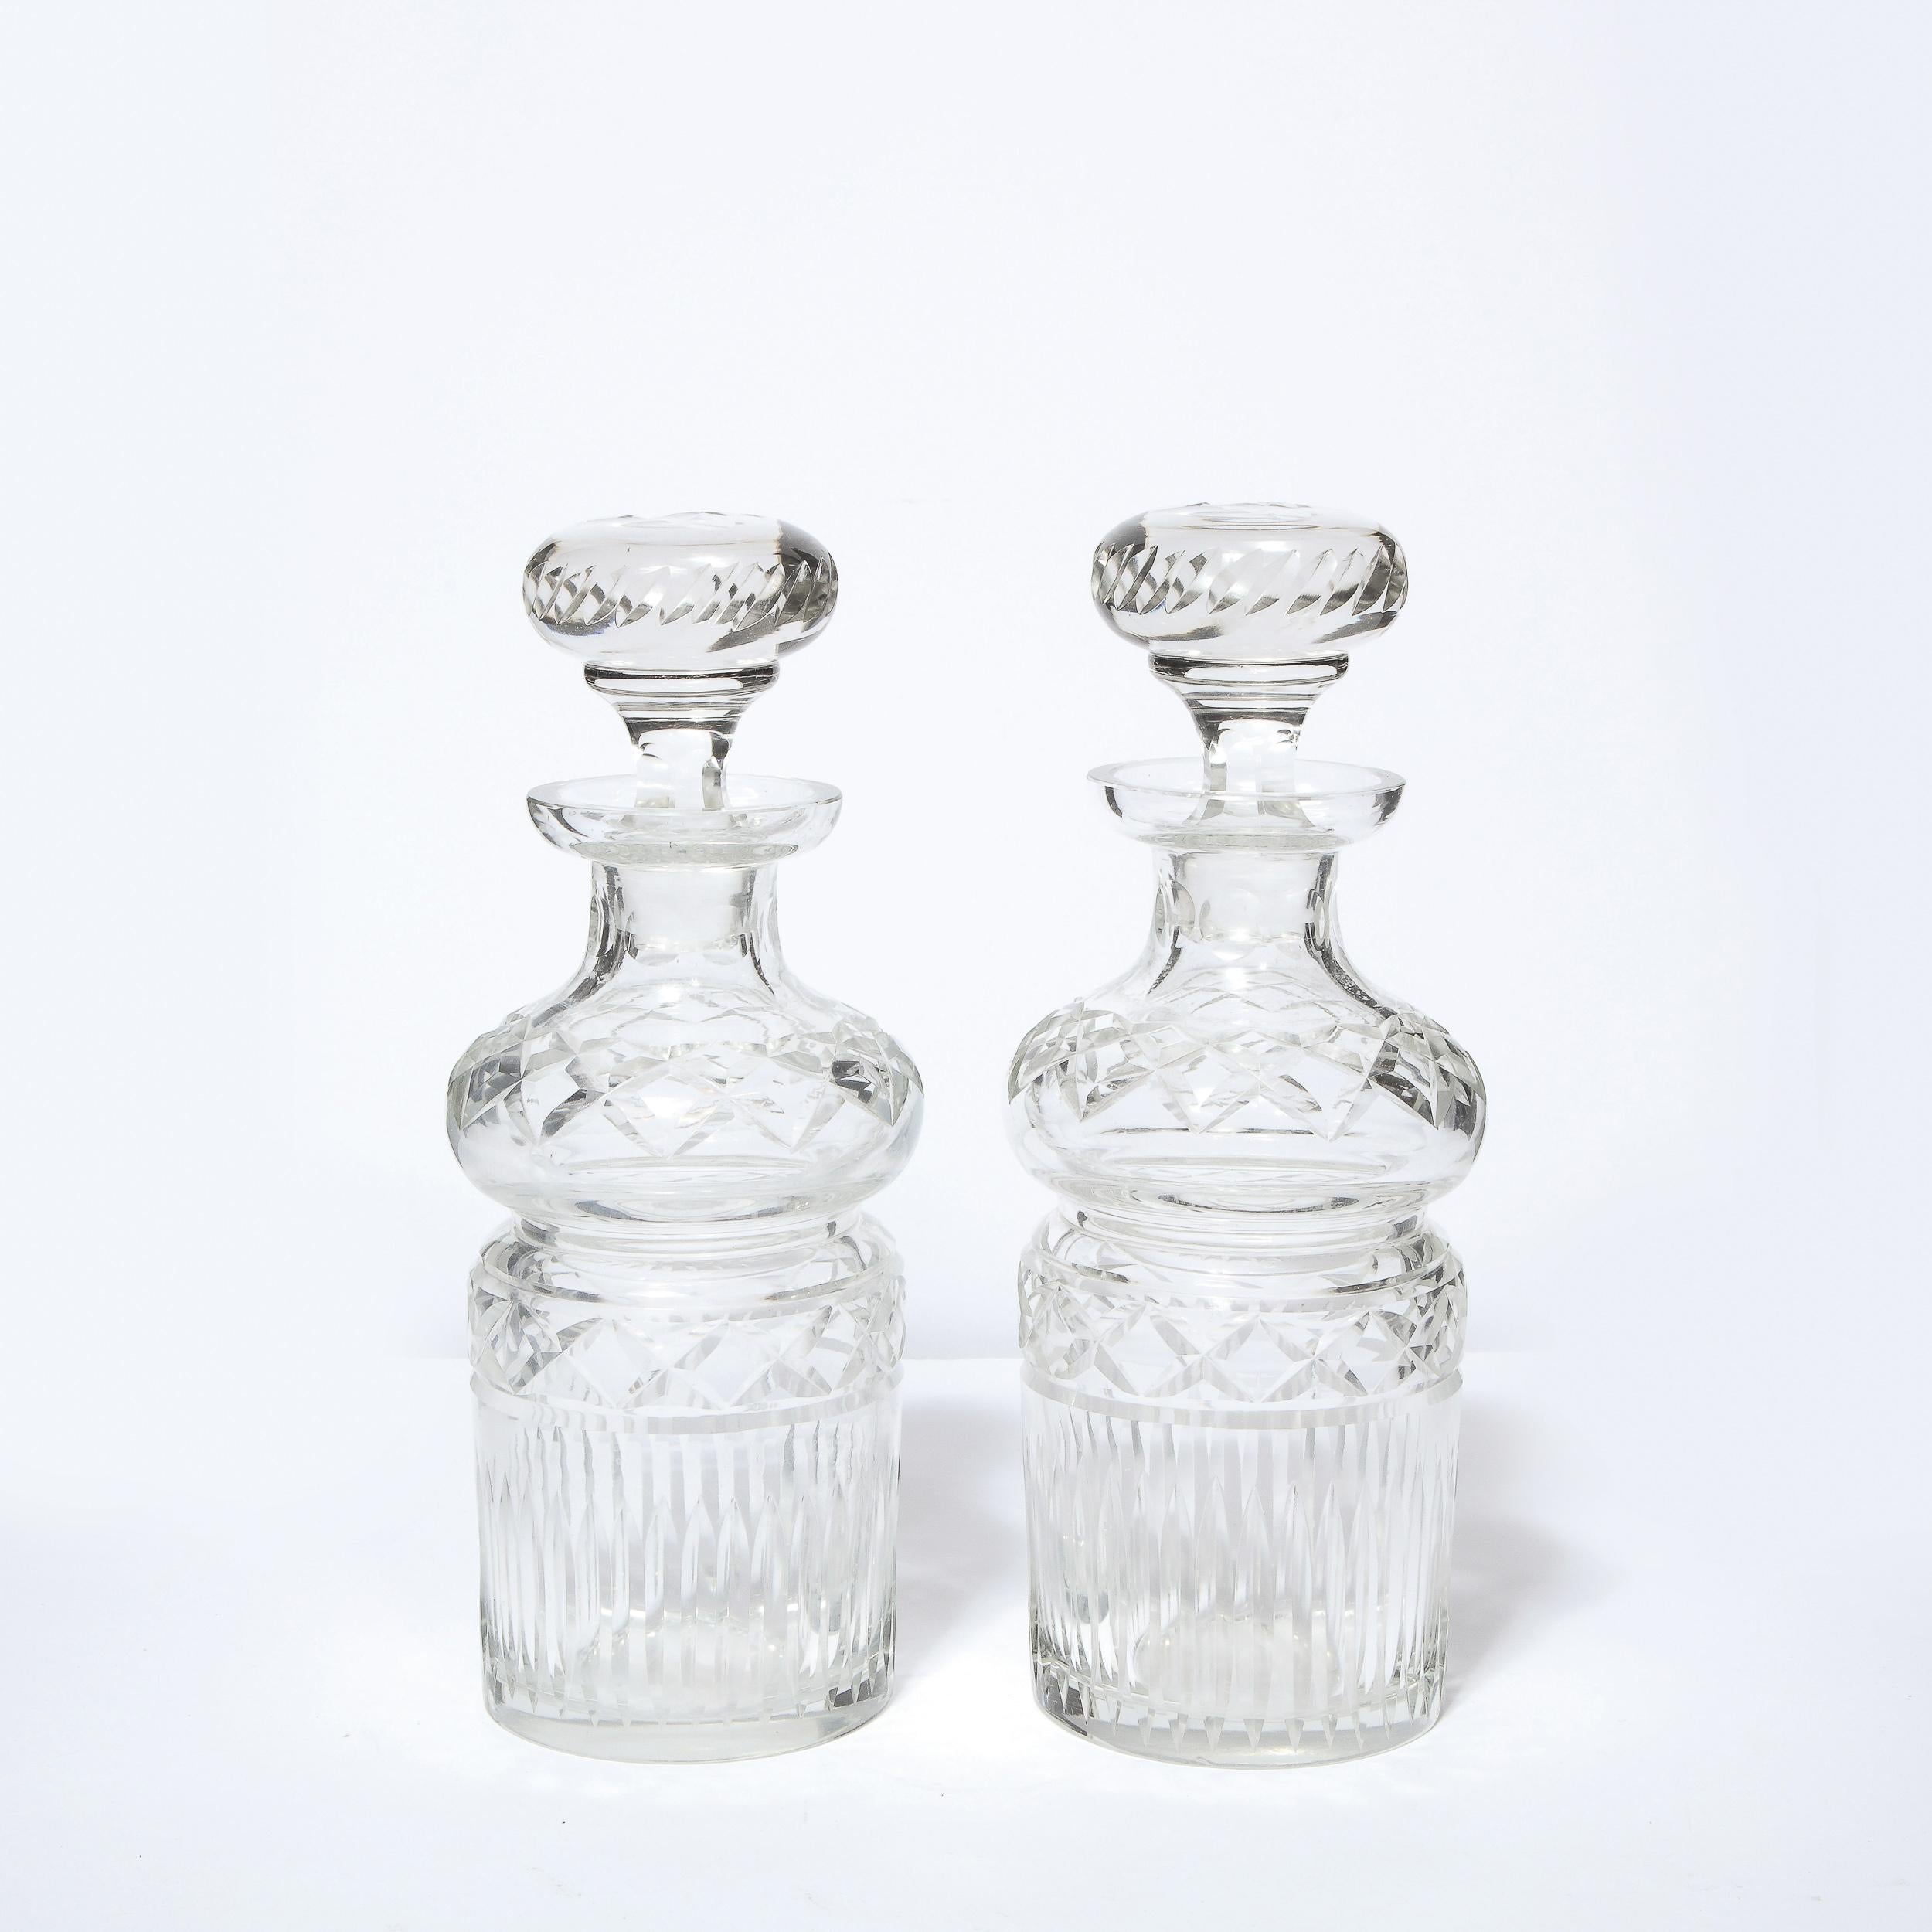 This stunning pair of Mid-Century Modern decanters were realized in the United States circa 1960. They features undulating cylindrical bodies- full of dynamic curves- with a wealth of geometric patterns etched into the body of each piece, including